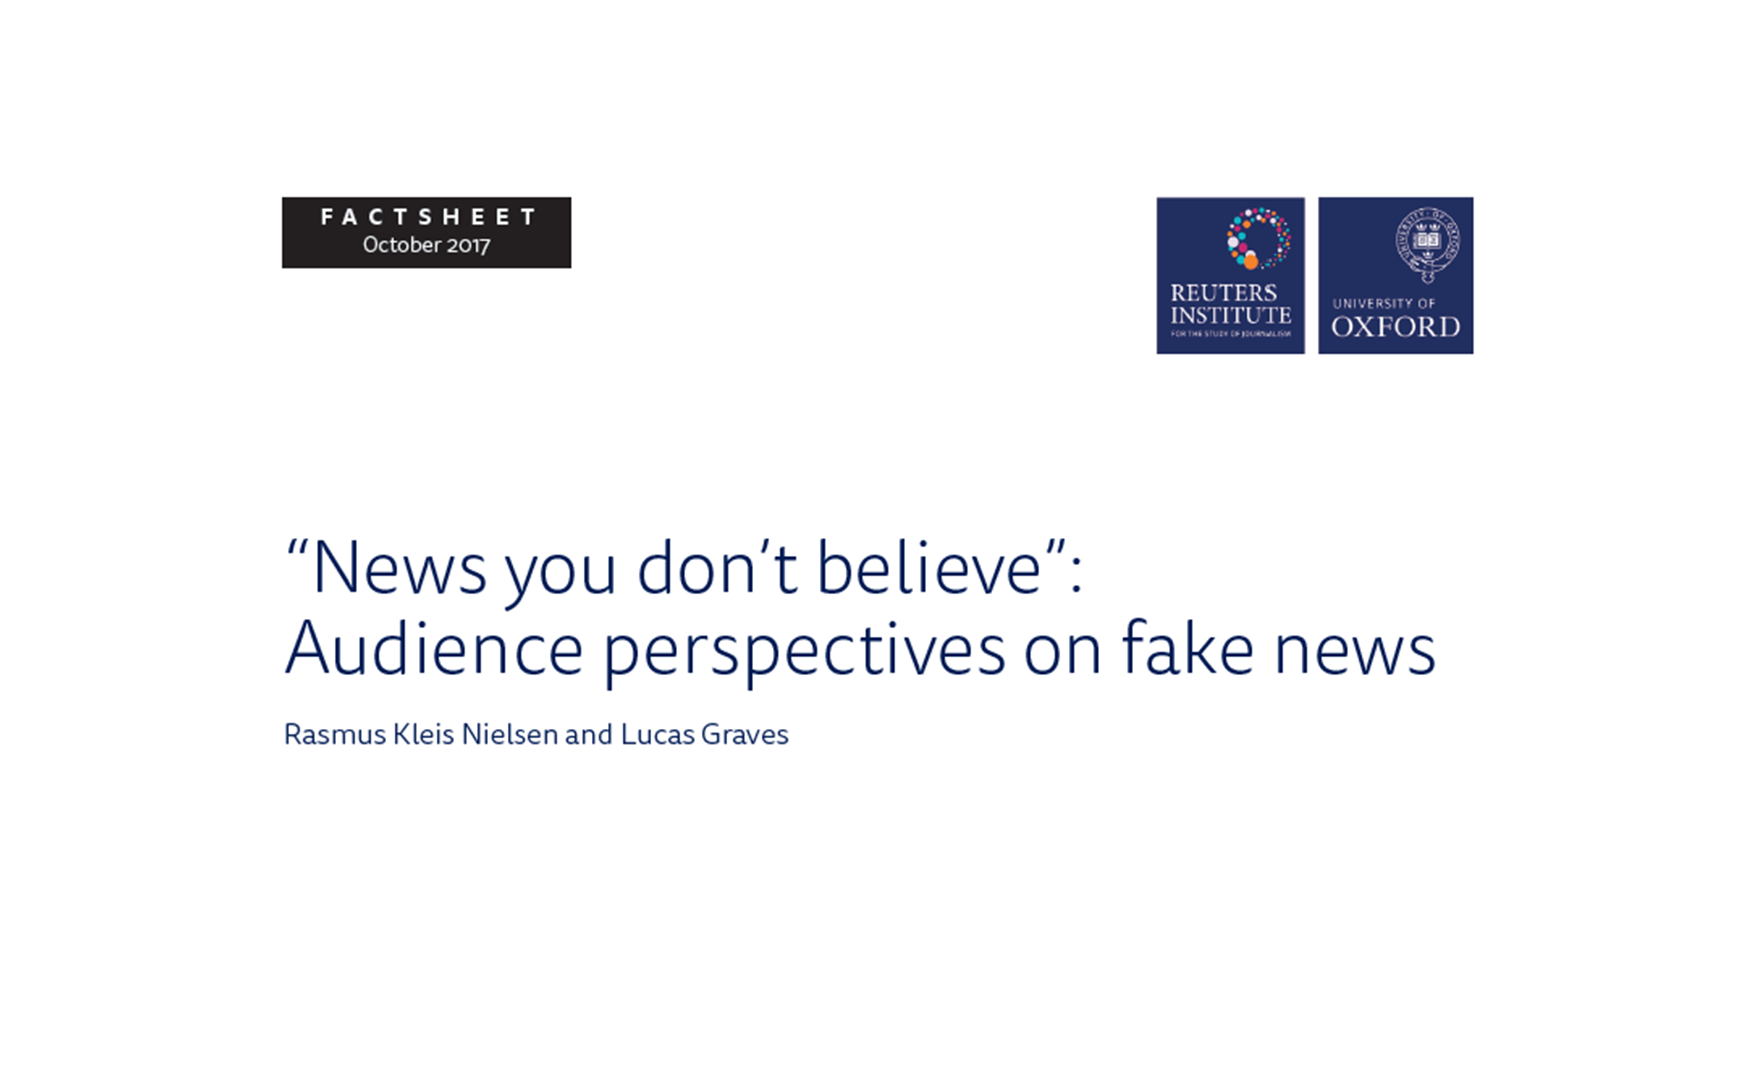 News you don't believe”: Audience perspectives on fake news